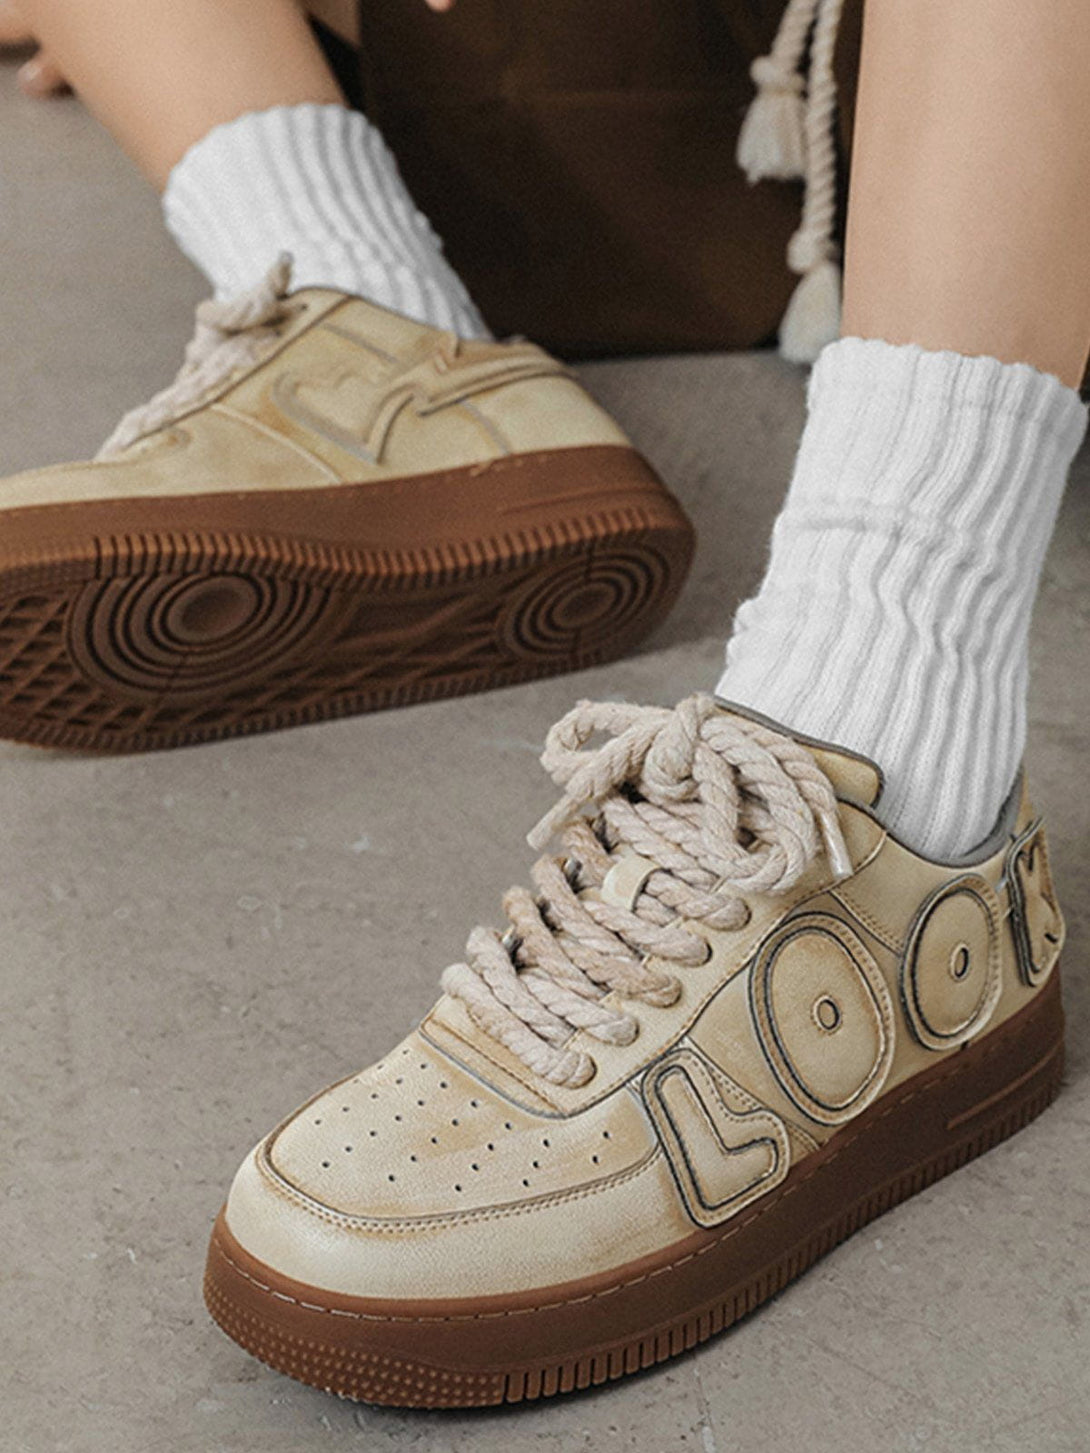 Levefly - "LOOK" Letters Casual Shoes - Streetwear Fashion - levefly.com